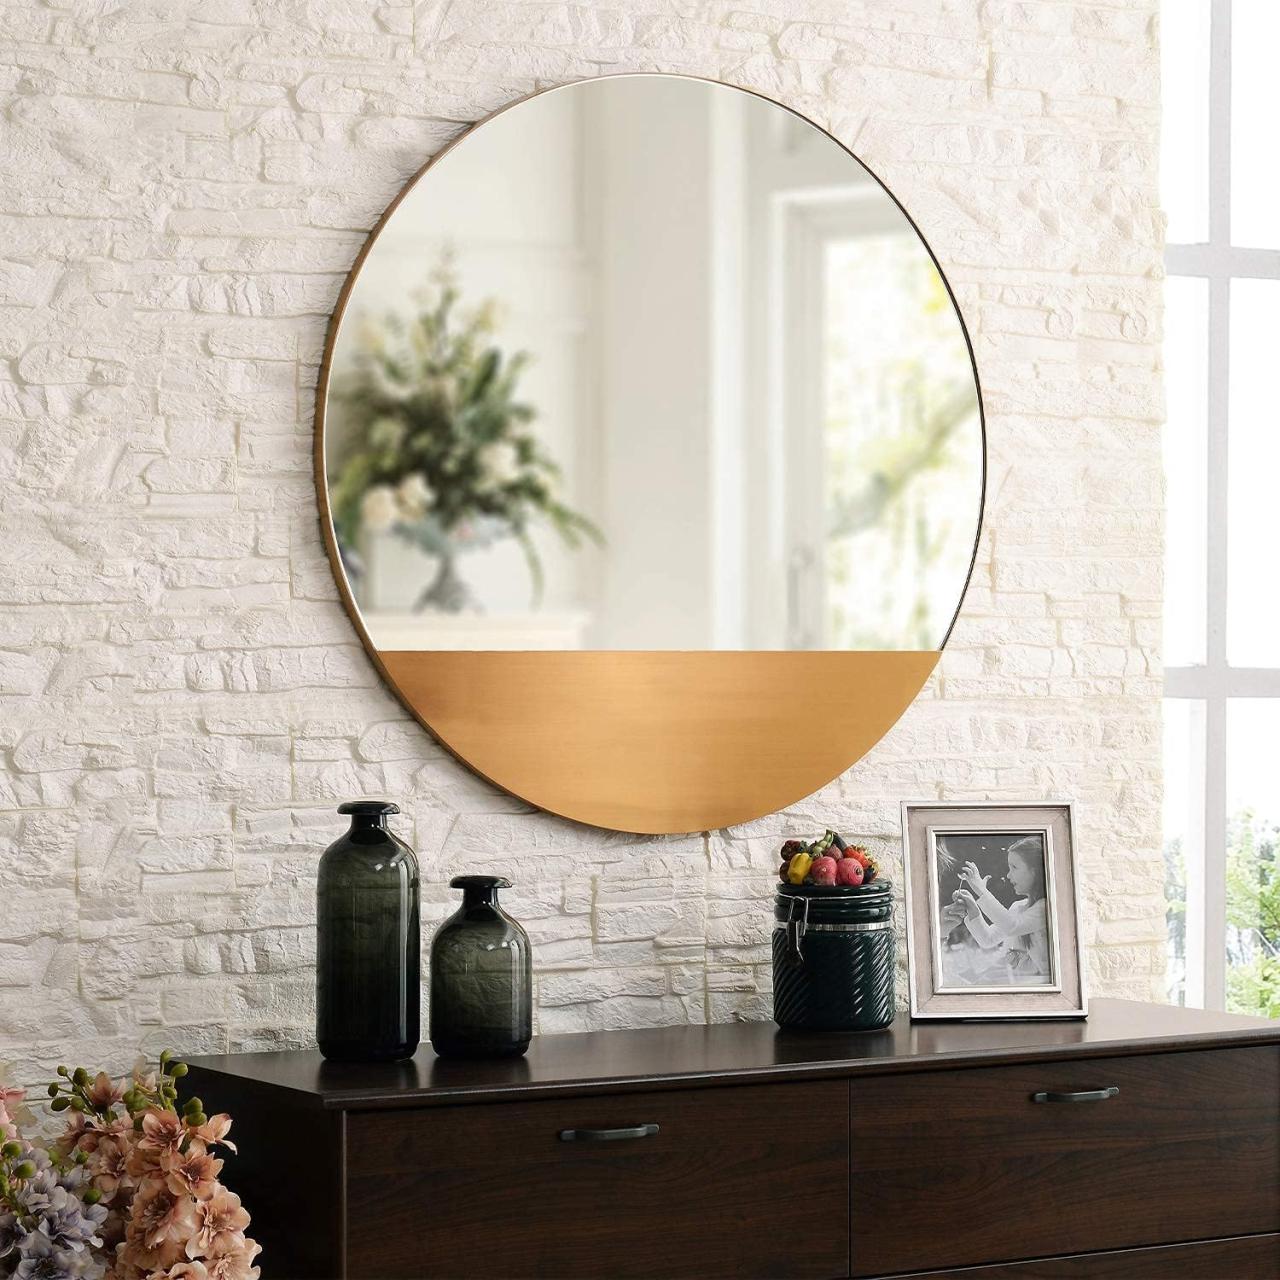 Round wall mirrors mirror big living room collection